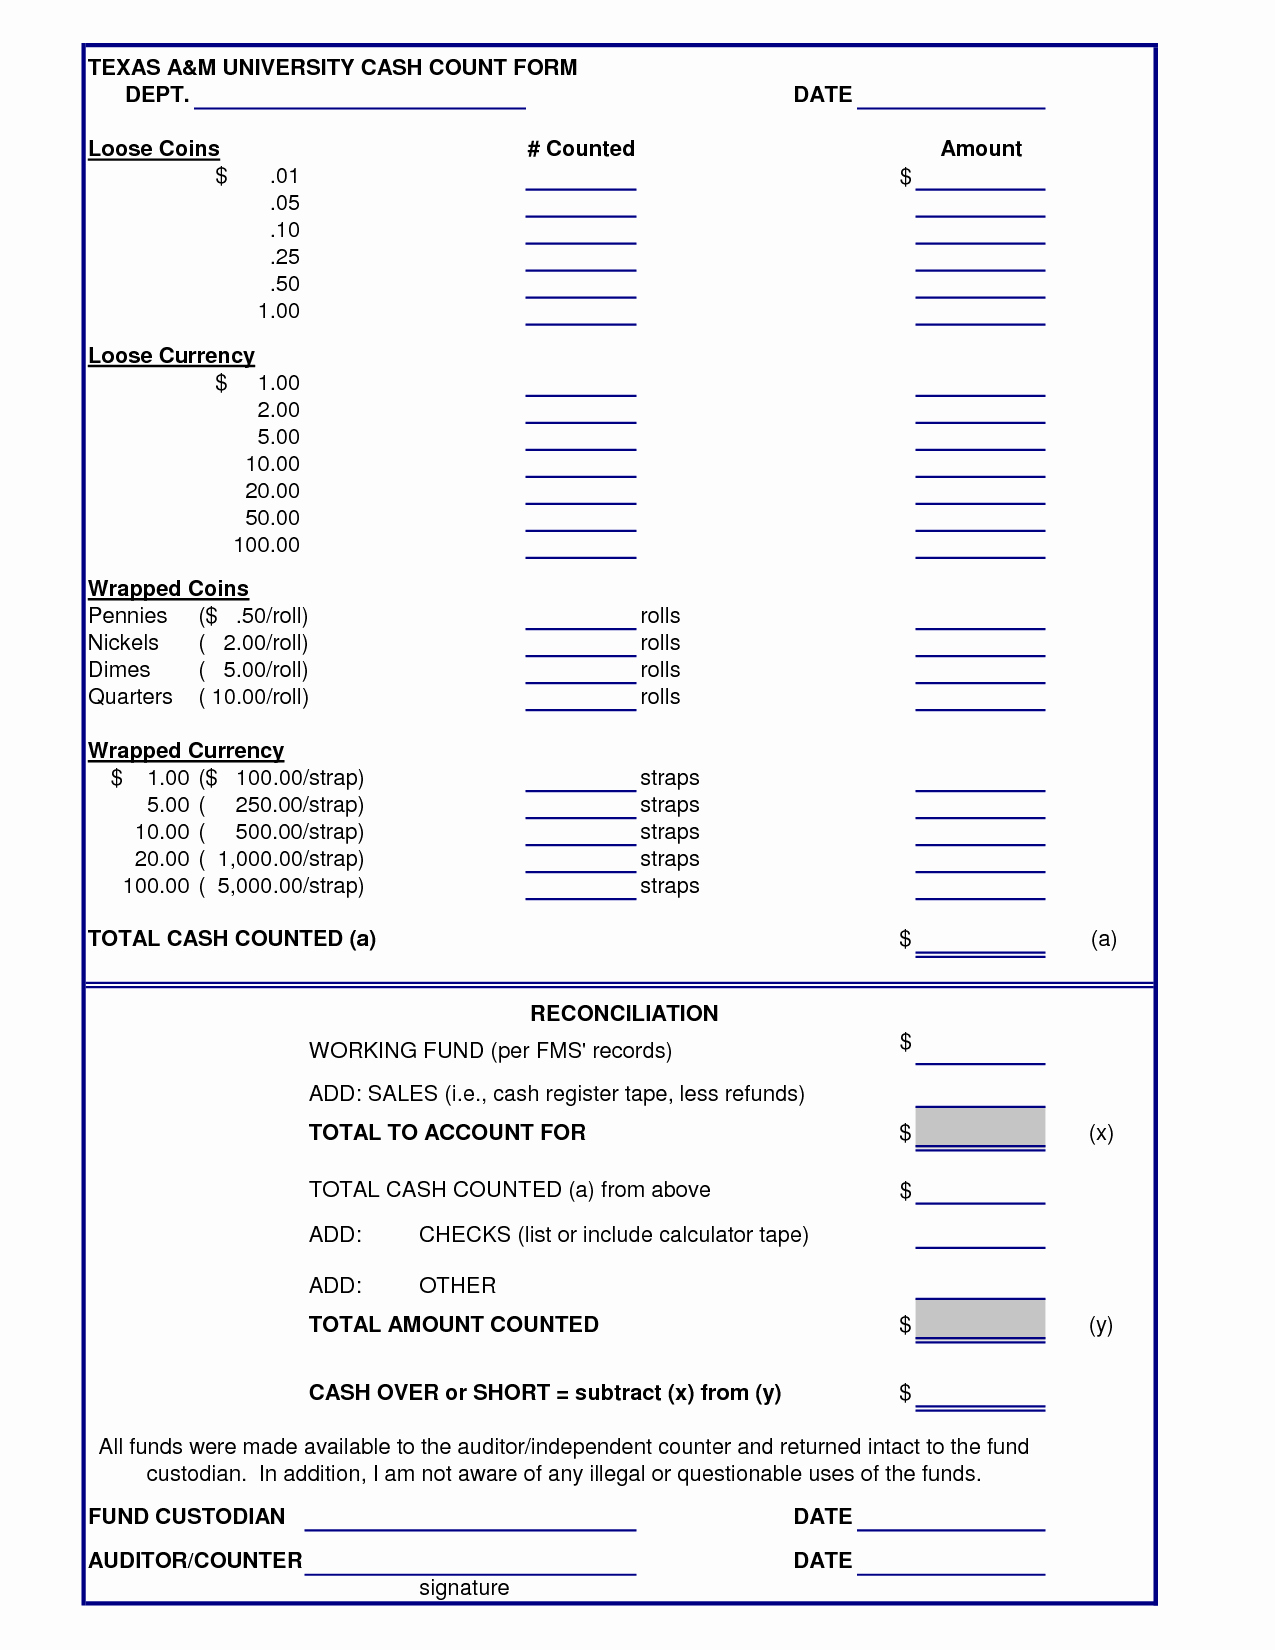 Daily Cash Sheet Template Excel Fresh Cash Drawer Count Sheet Template